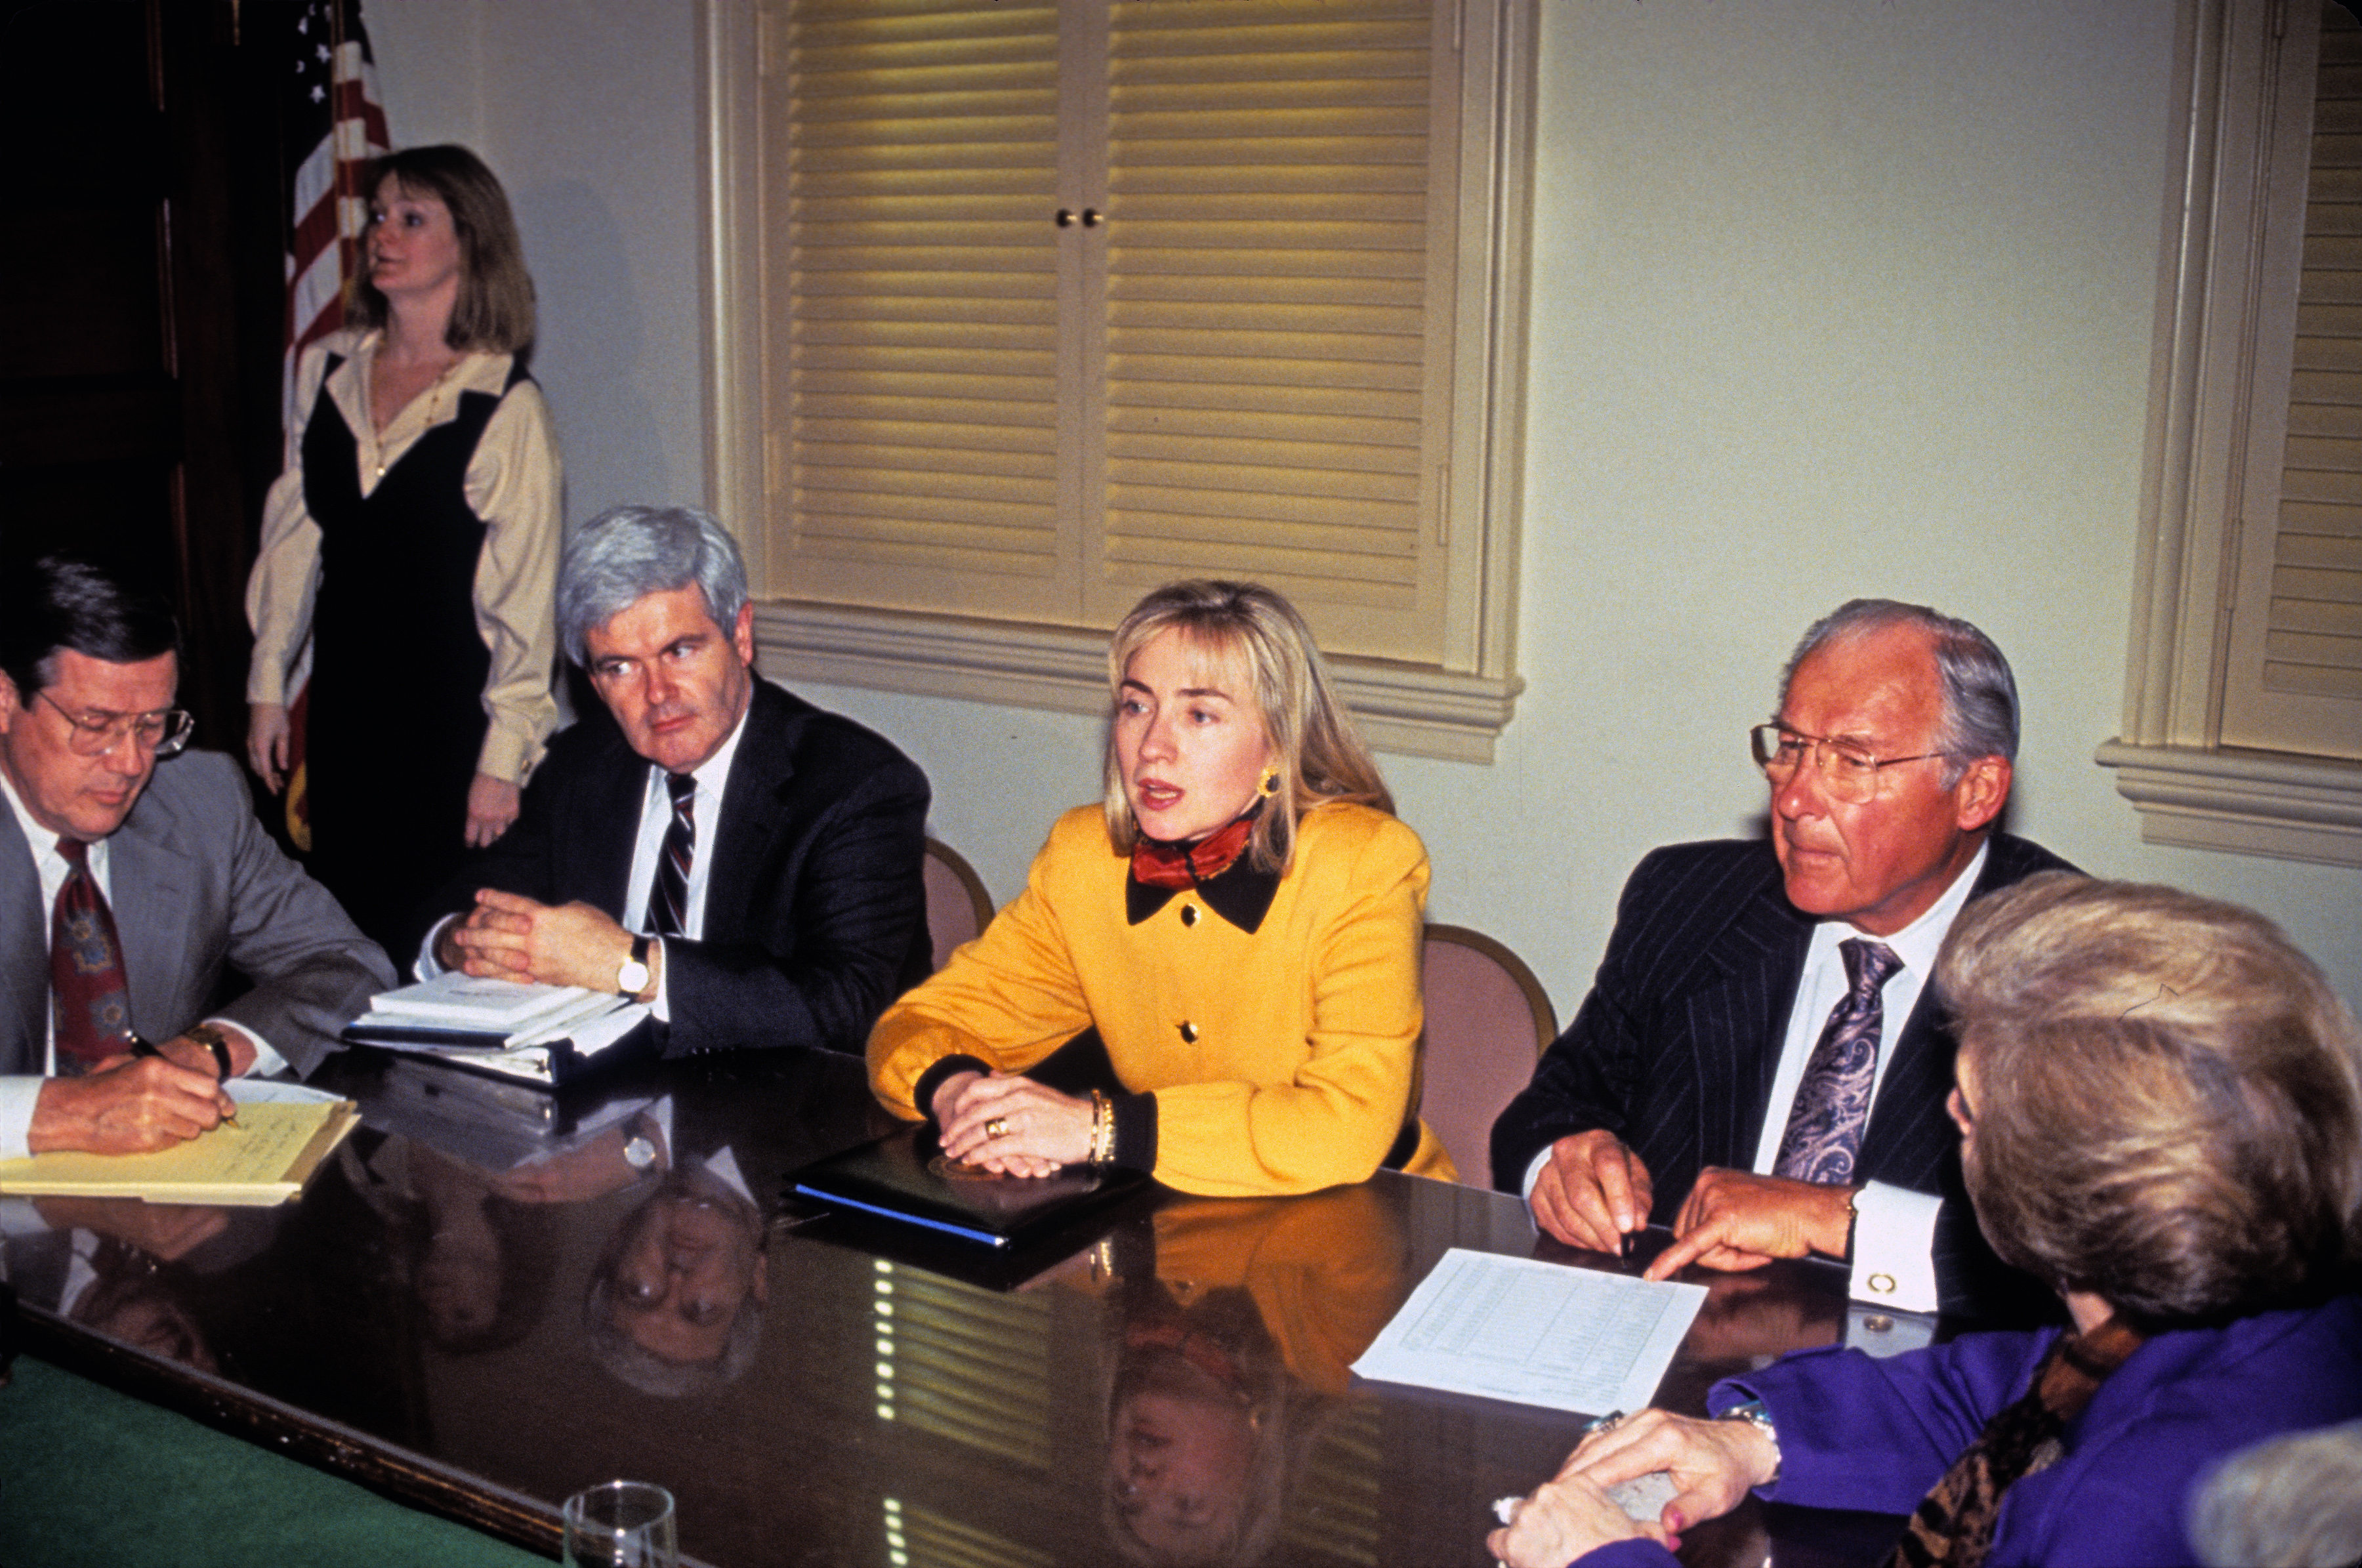 Clinton meets with United States House Minority Leader Robert H. Michel, right, and U.S. House Minority Whip Newt Gingrich, left, in the U.S. Capitol in Washington, D.C. on February 16, 1993. (Photo: Brad Markel/ZUMA Press/Newscom)